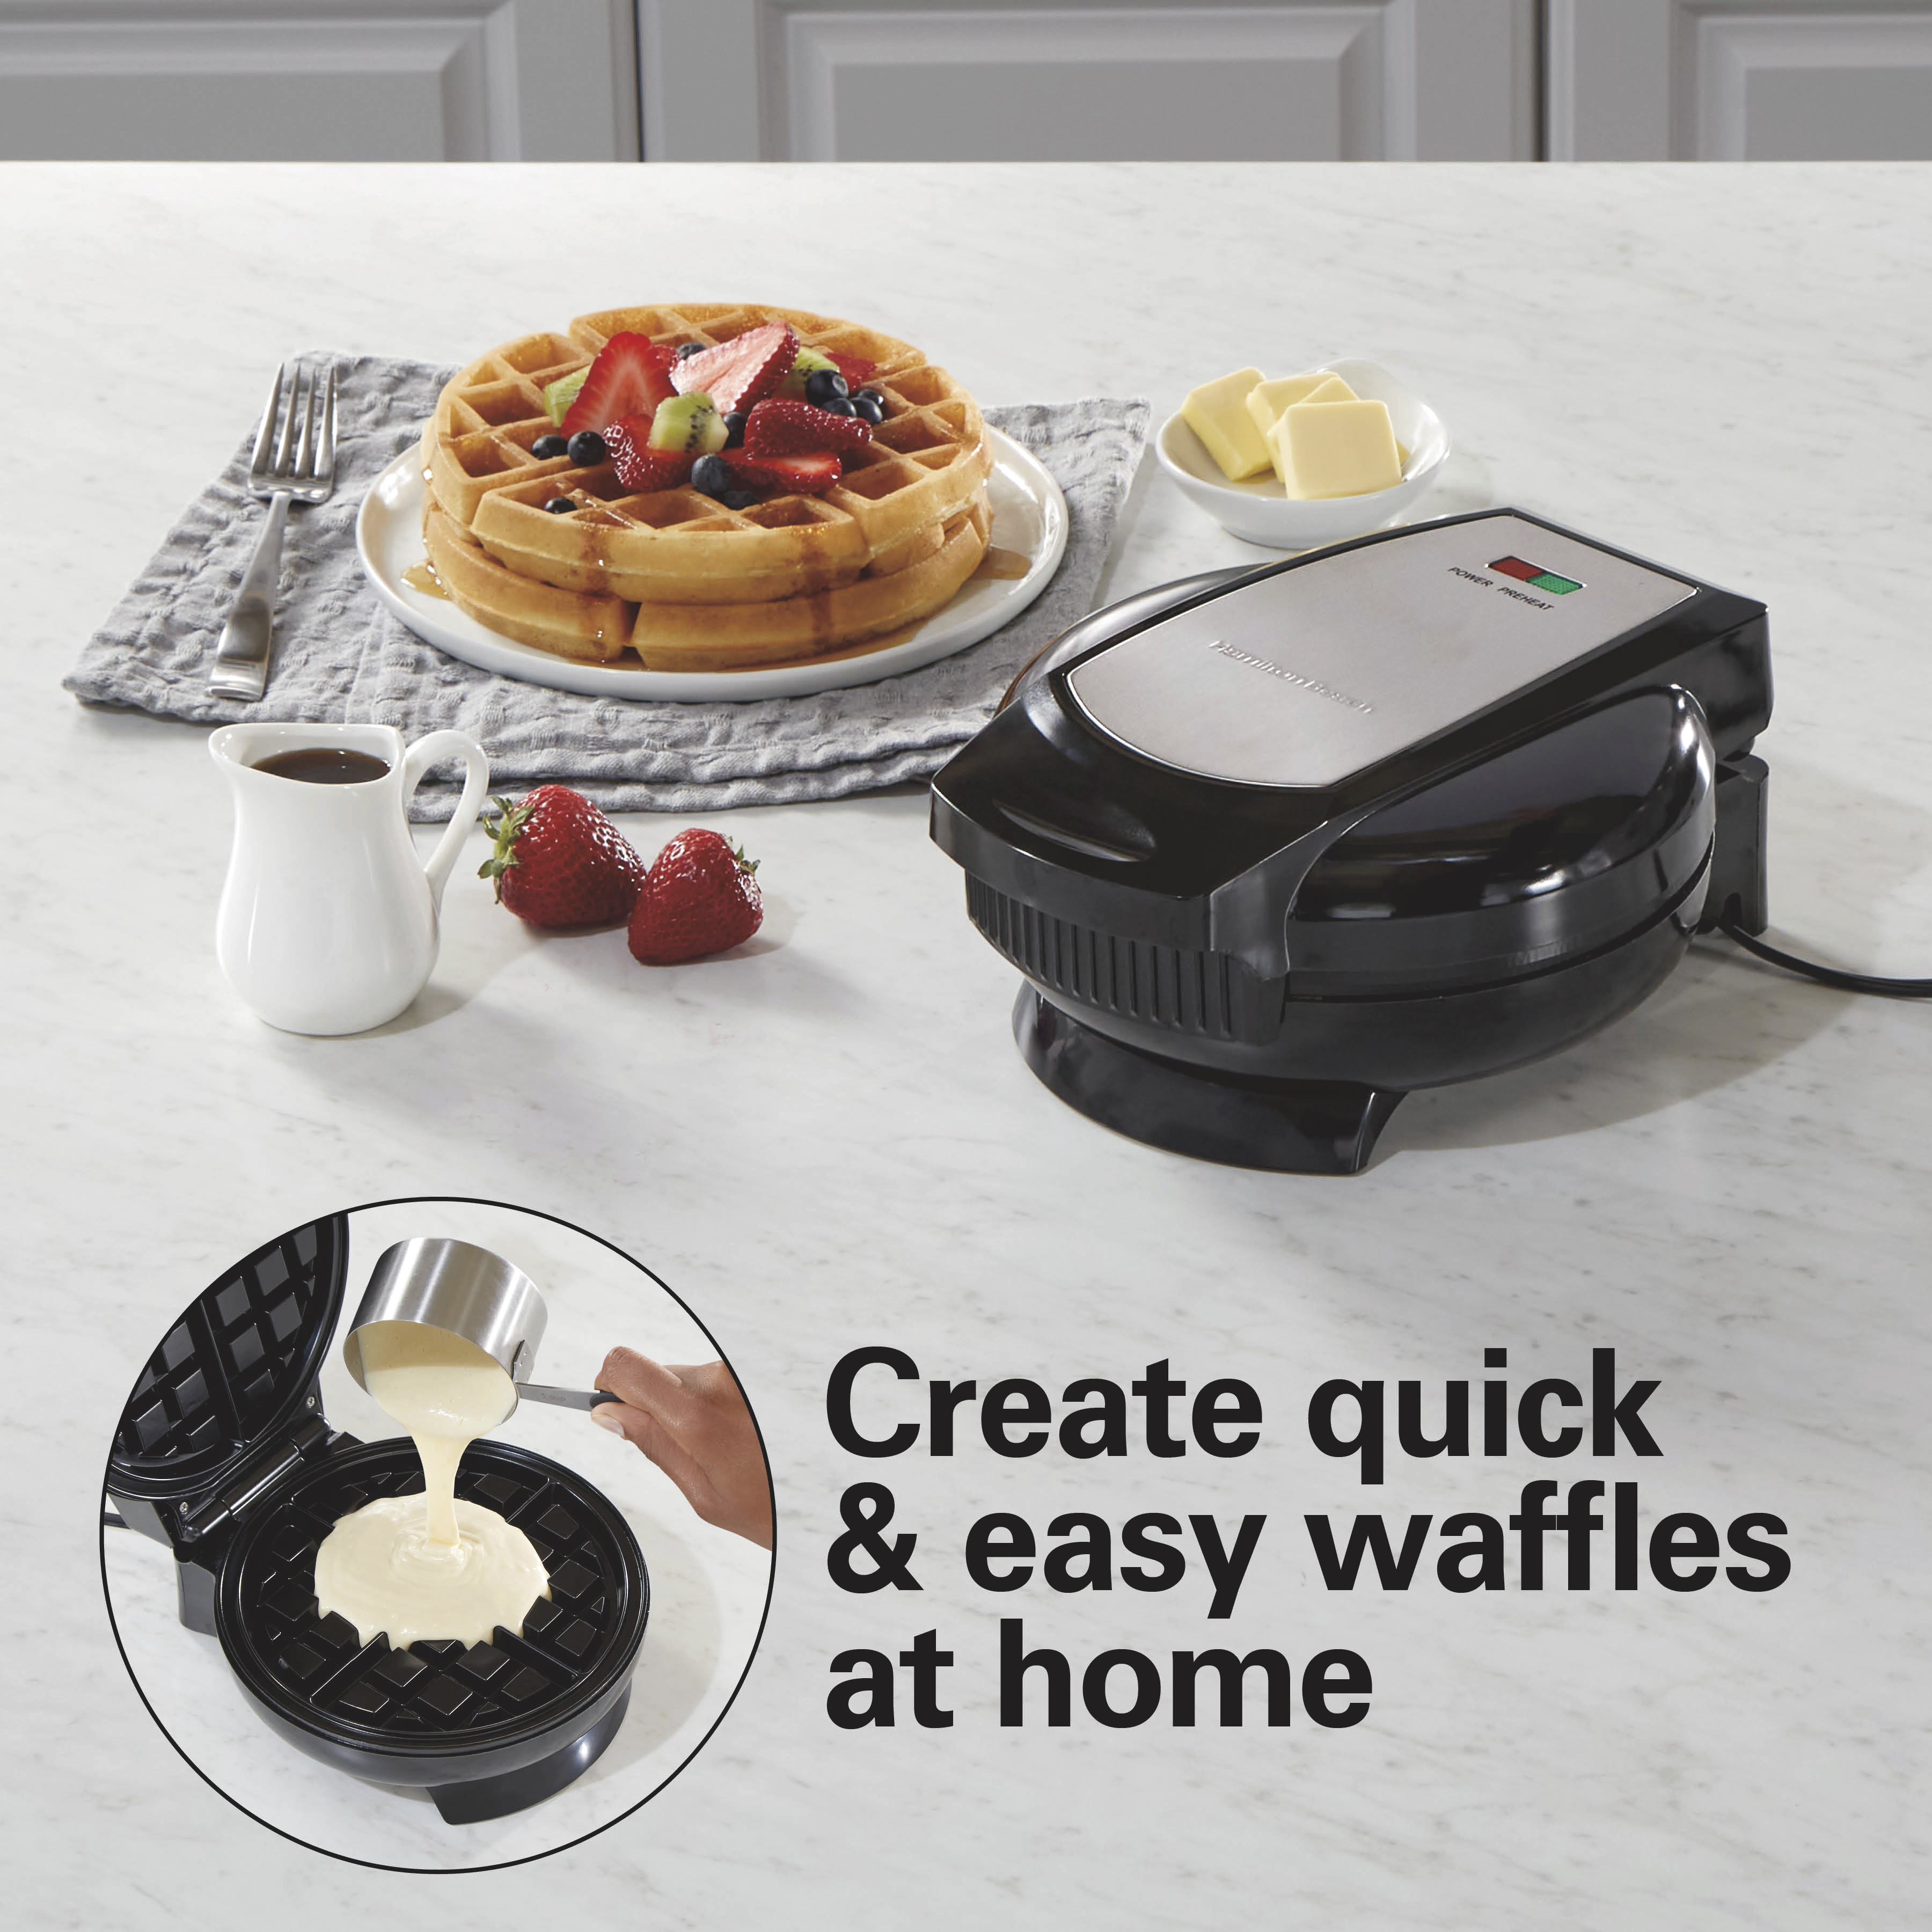 Hamilton Beach Belgian Waffle Maker with Easy to Clean Non-Stick Plates, Black 26072 - image 2 of 8